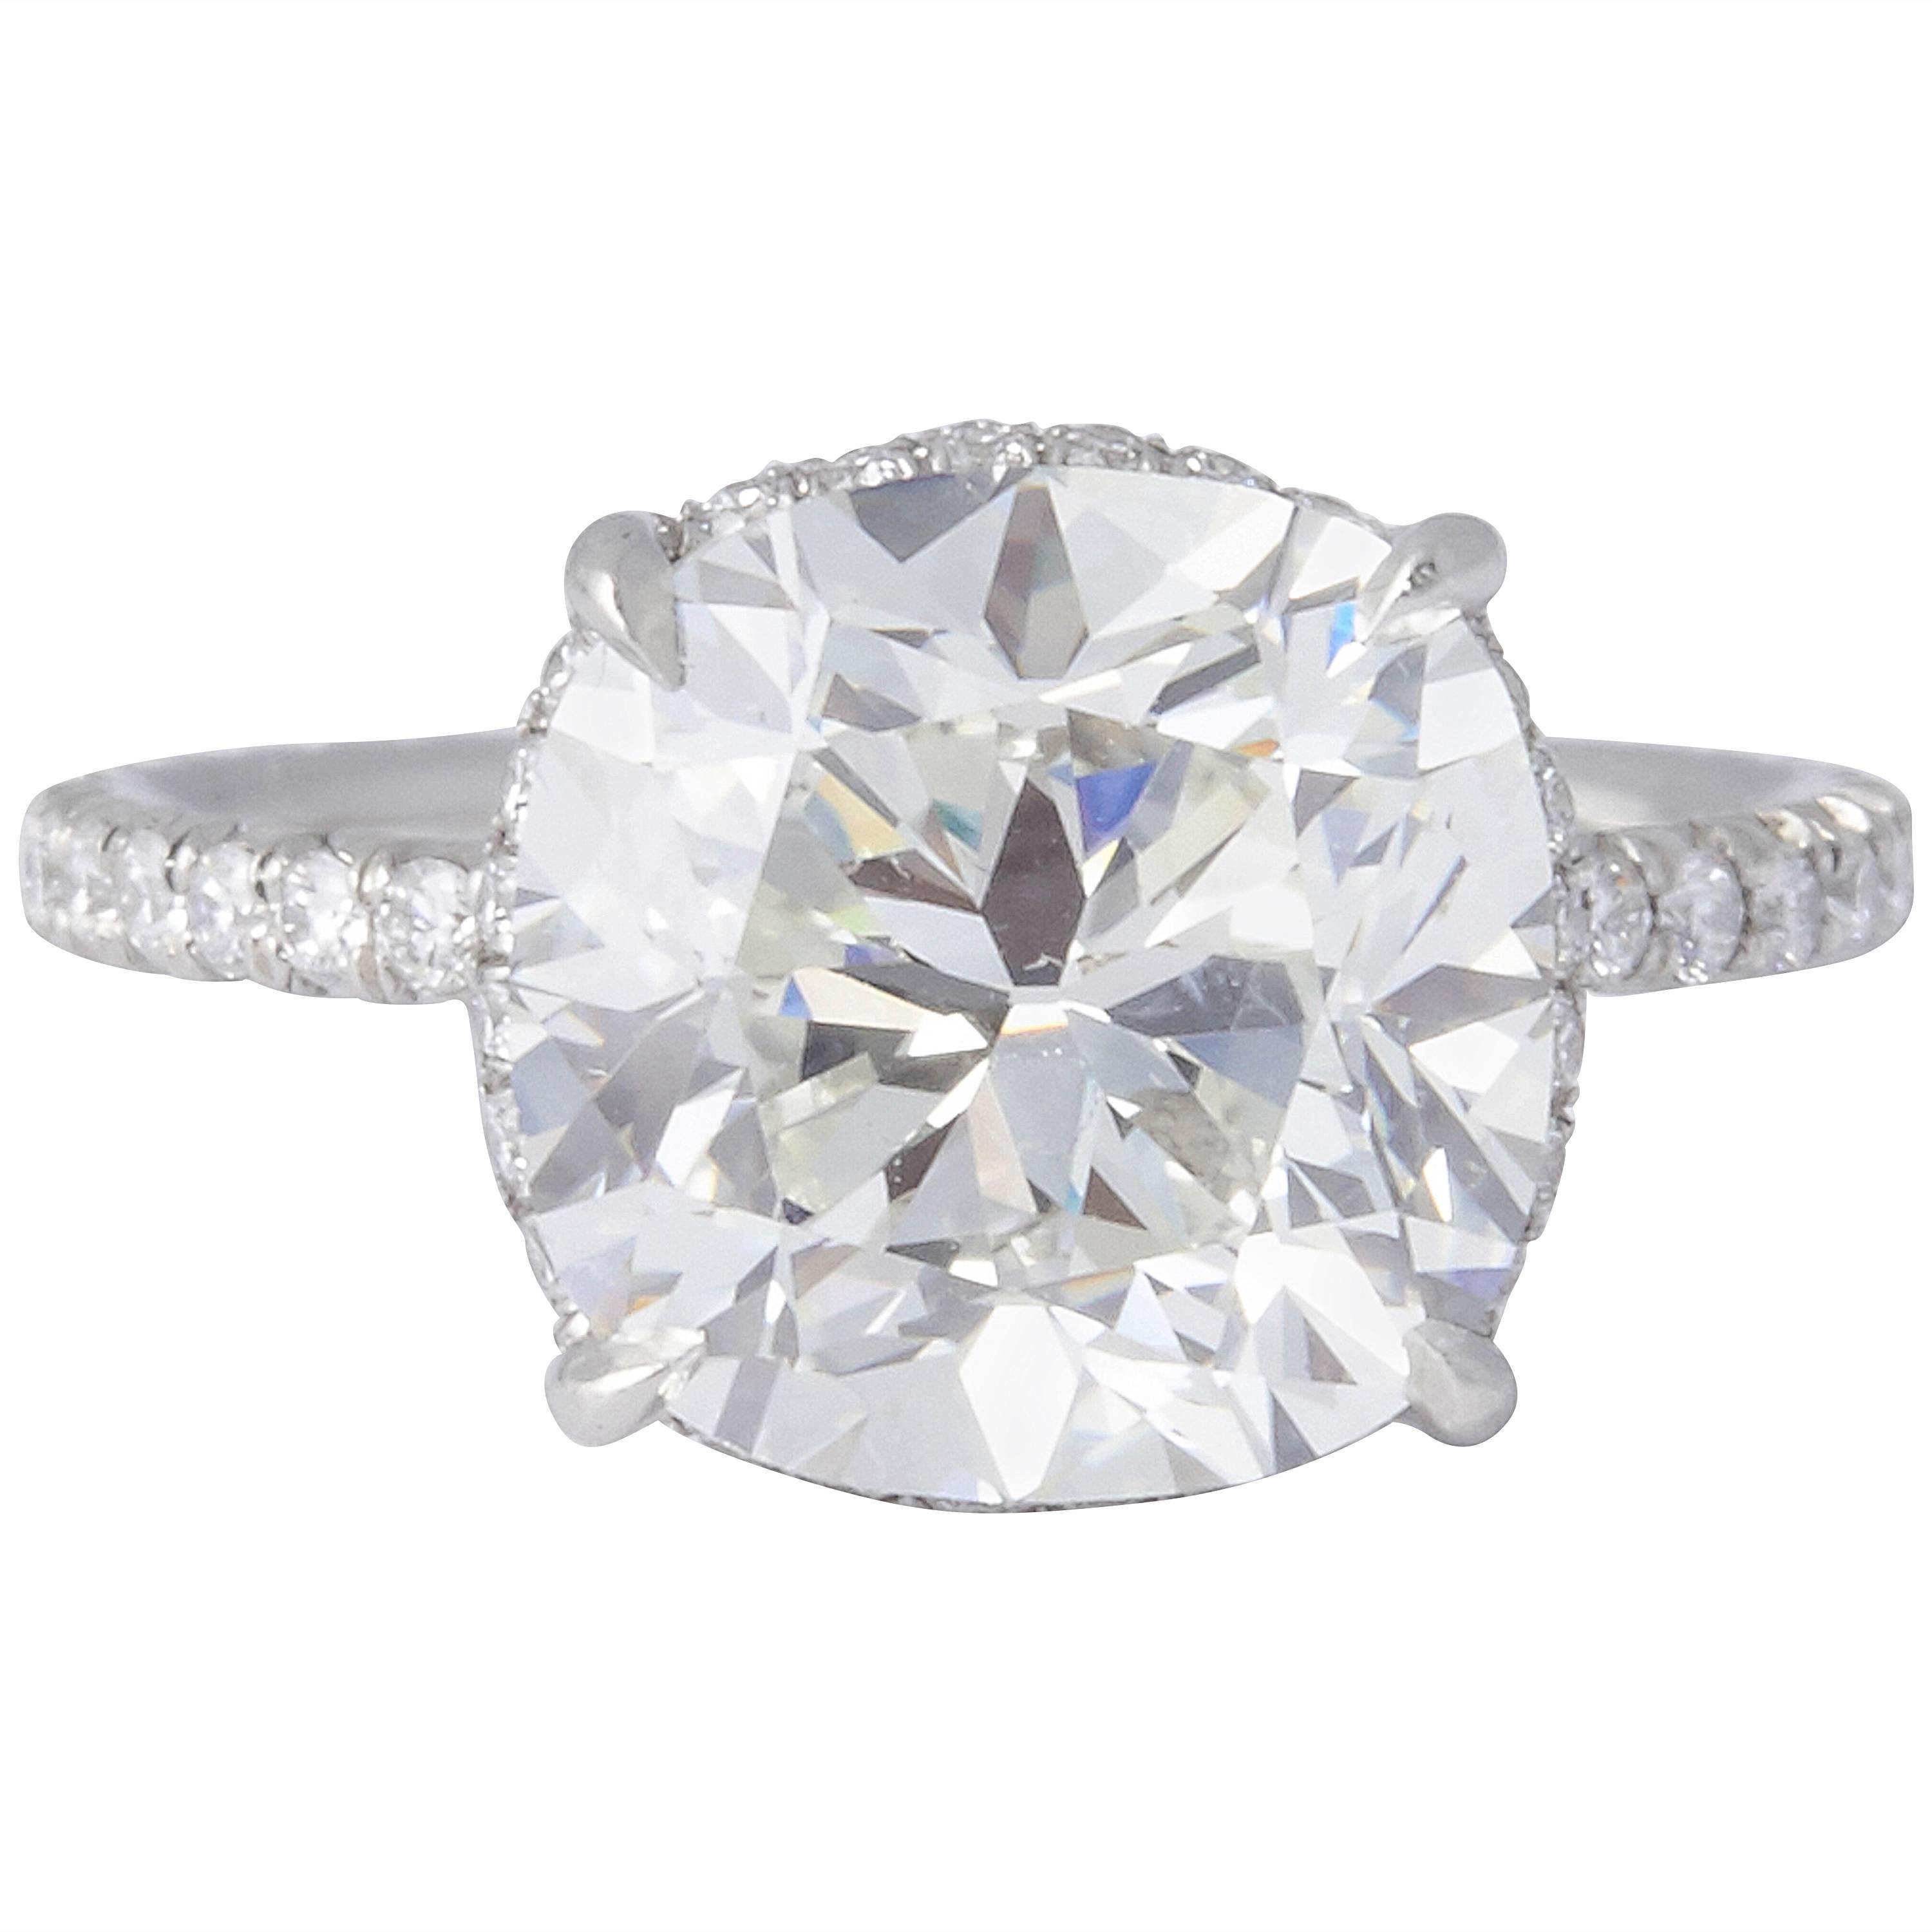 Rare 5 Carat Cushion Brilliant Cut GIA Certified Engagement Ring For Sale